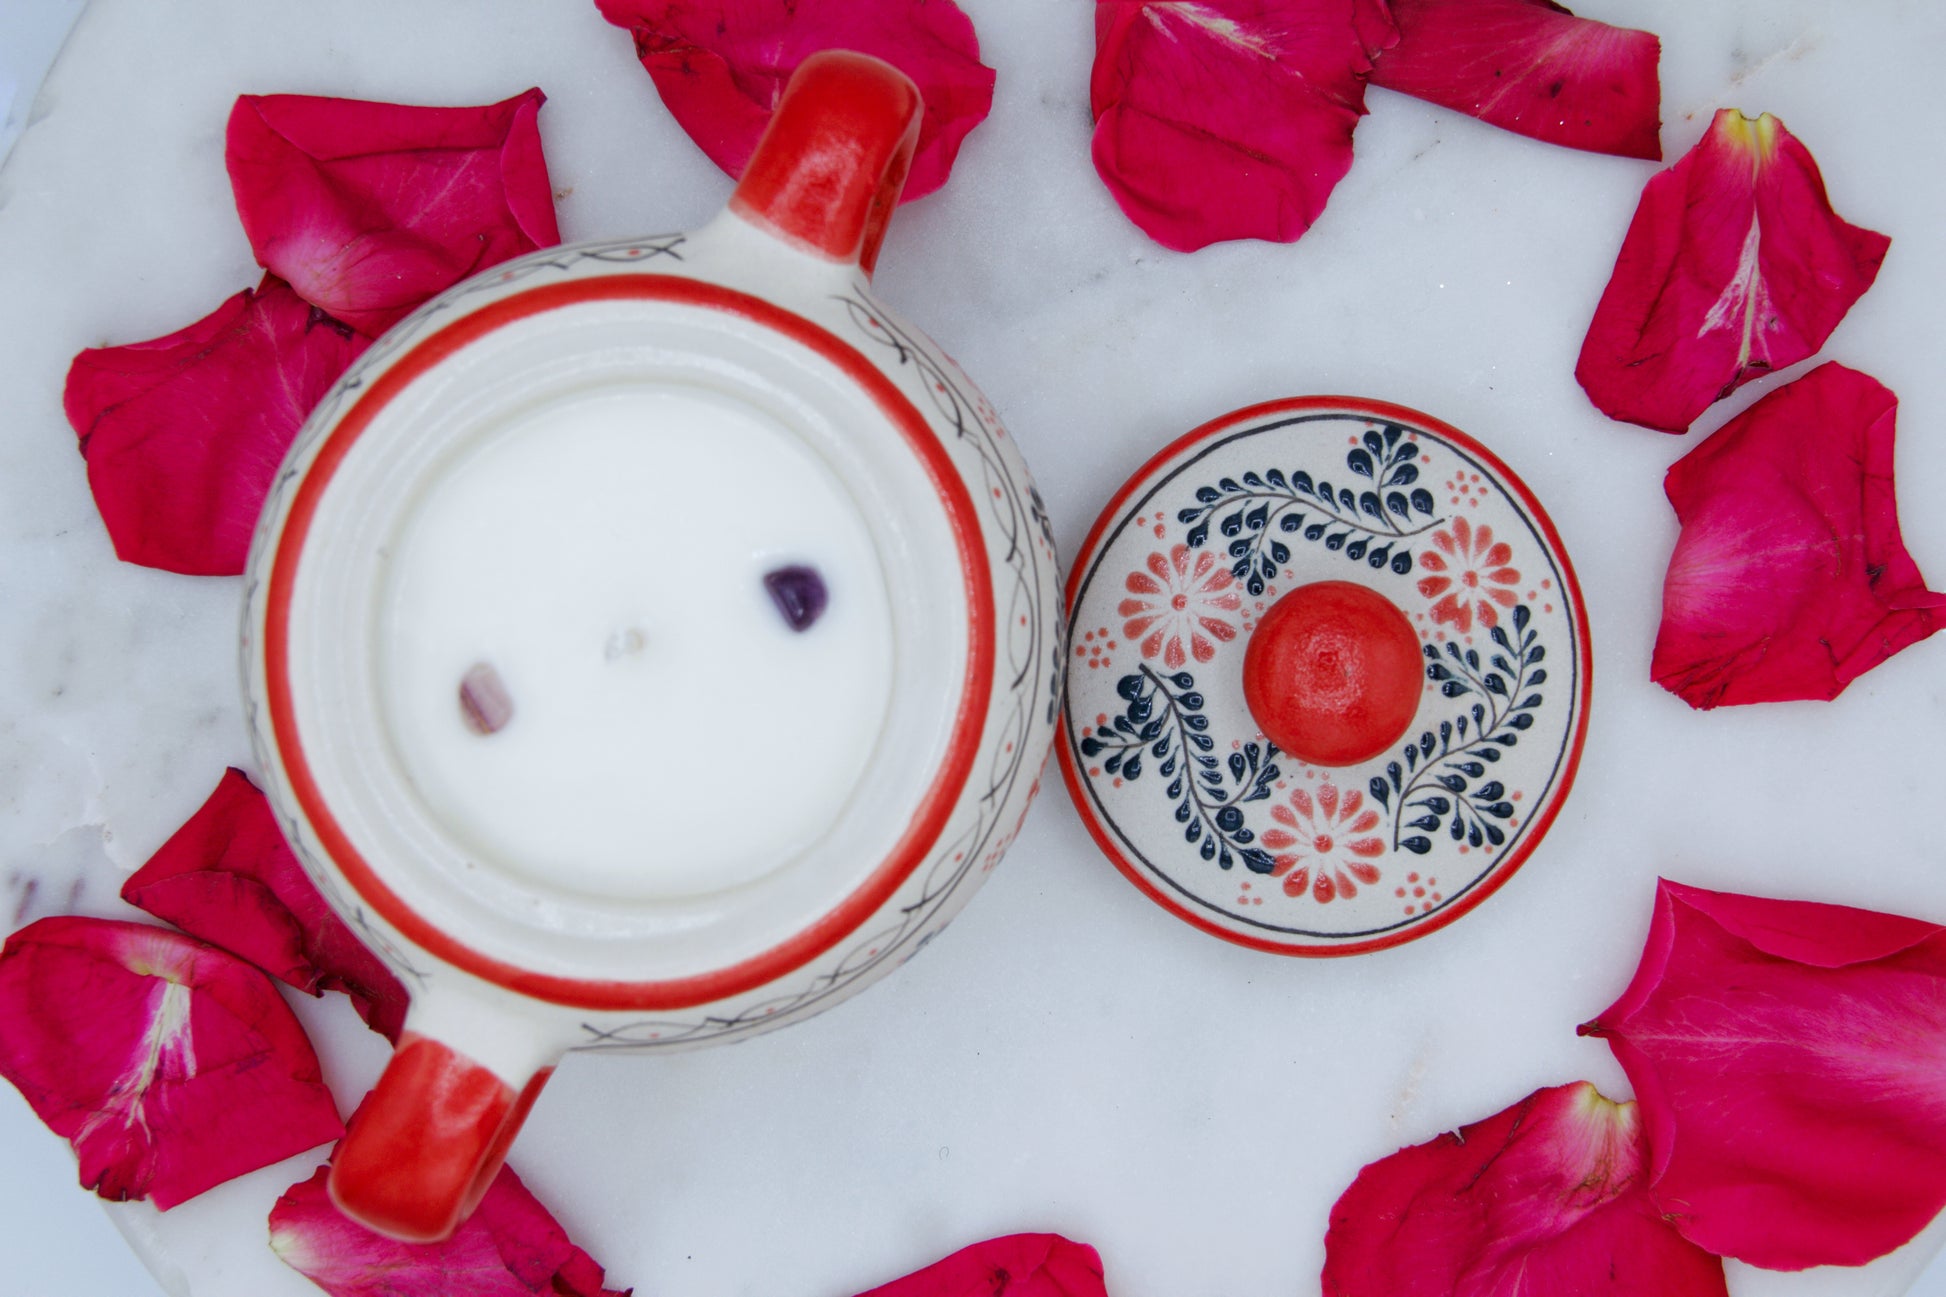 Top view of the handmade artisanal candle in a red floral design talavera with handles on both sides and an open lid placed on the side. Custom made by Artisan in Mexico. 100% All Natural Soy Candle. Reuse the talavera as home decor or storage.